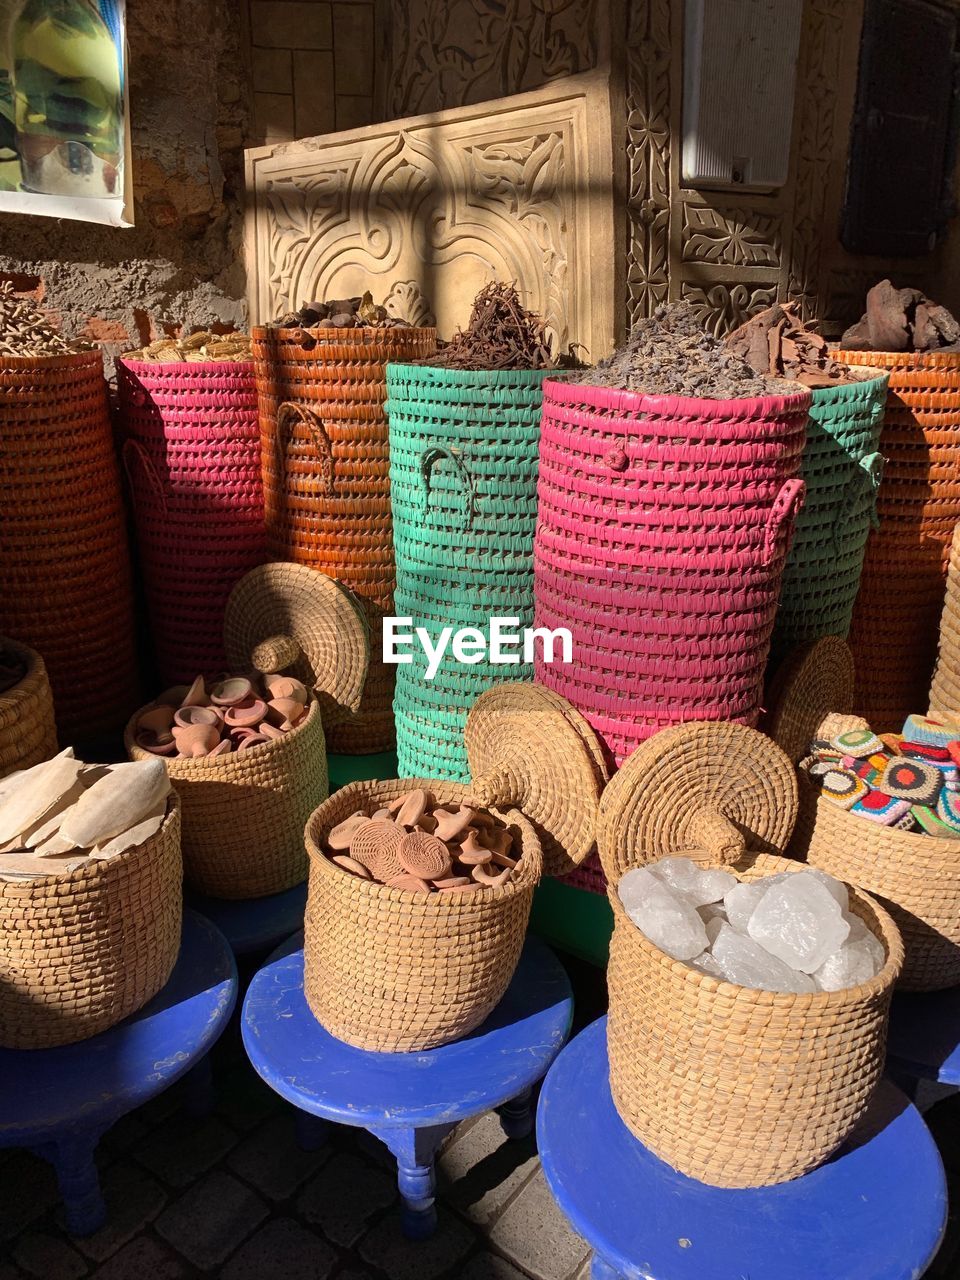 Various objects in baskets for sale at market stall